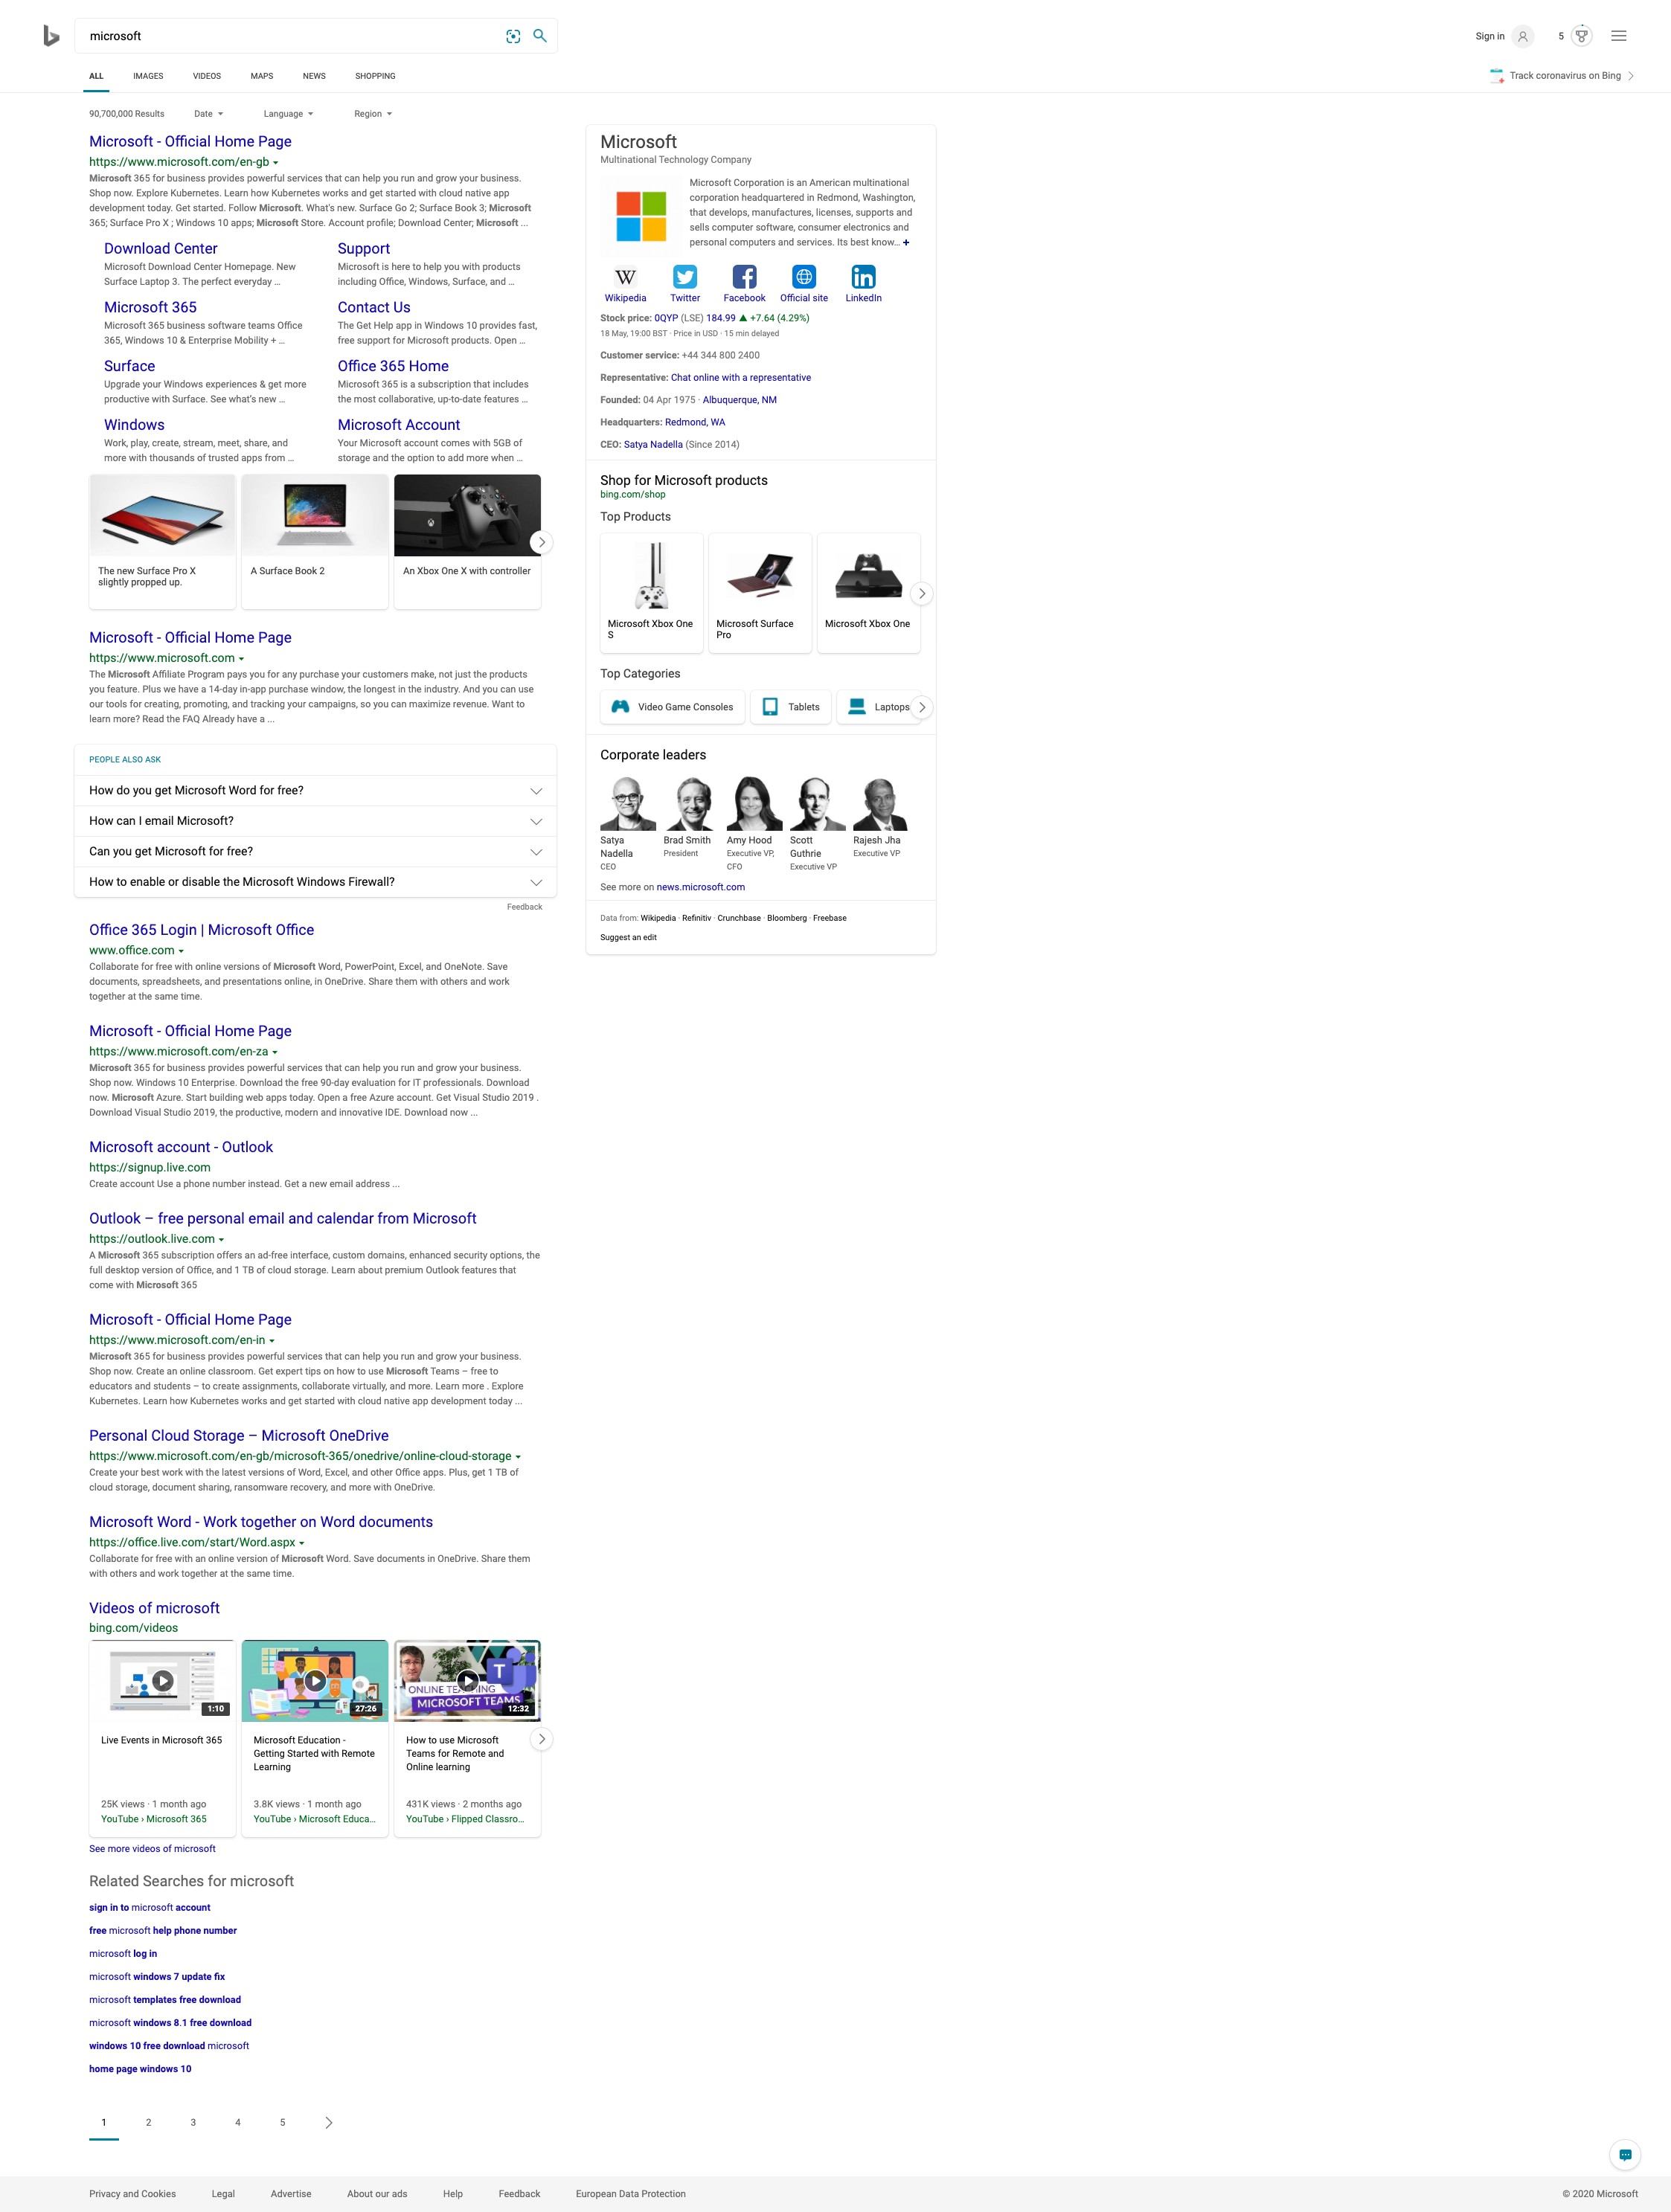 Bing SERP for a search on the word on Microsoft